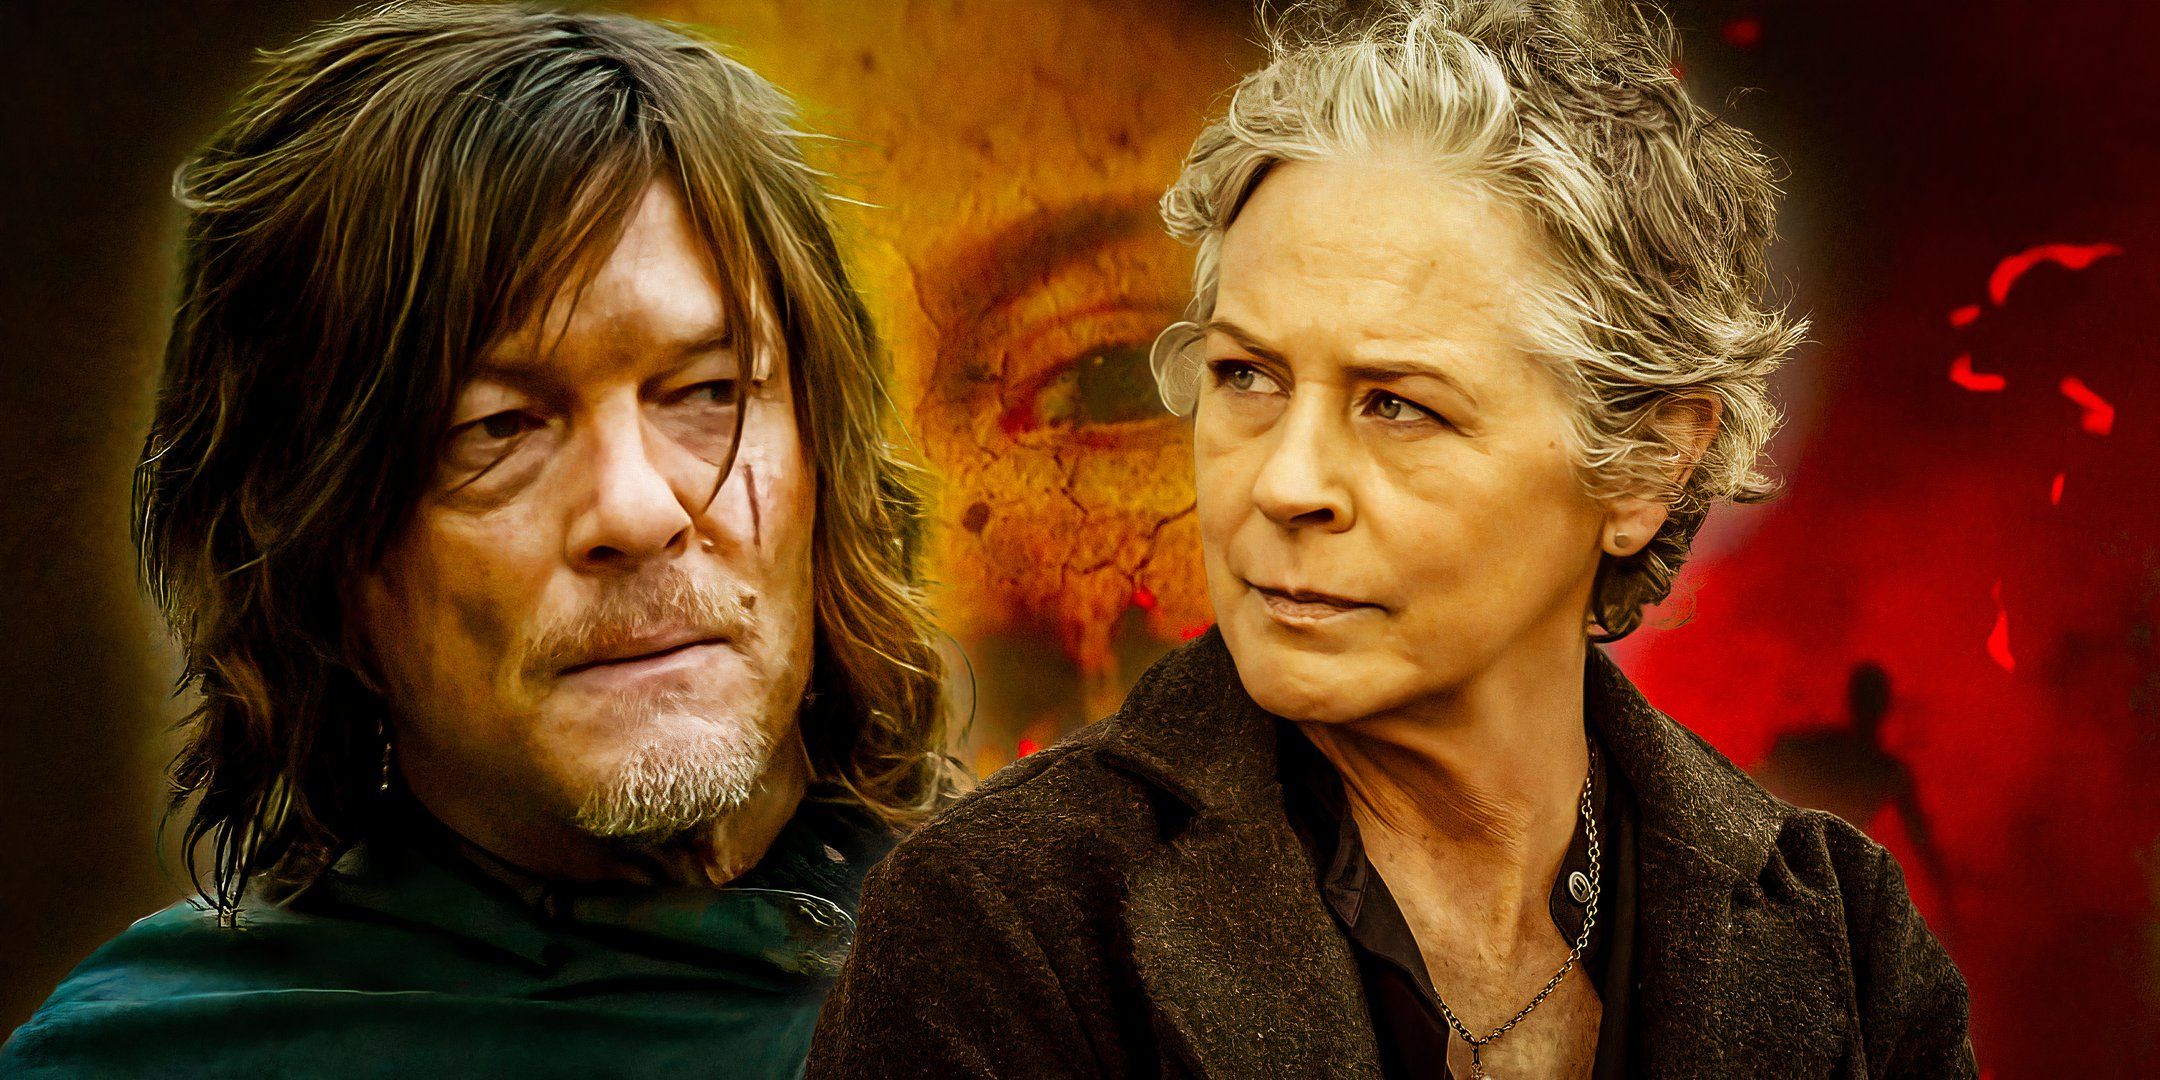 Norman Reedus as Daryl Dixon and Melissa McBride as Carol in The Walking Dead